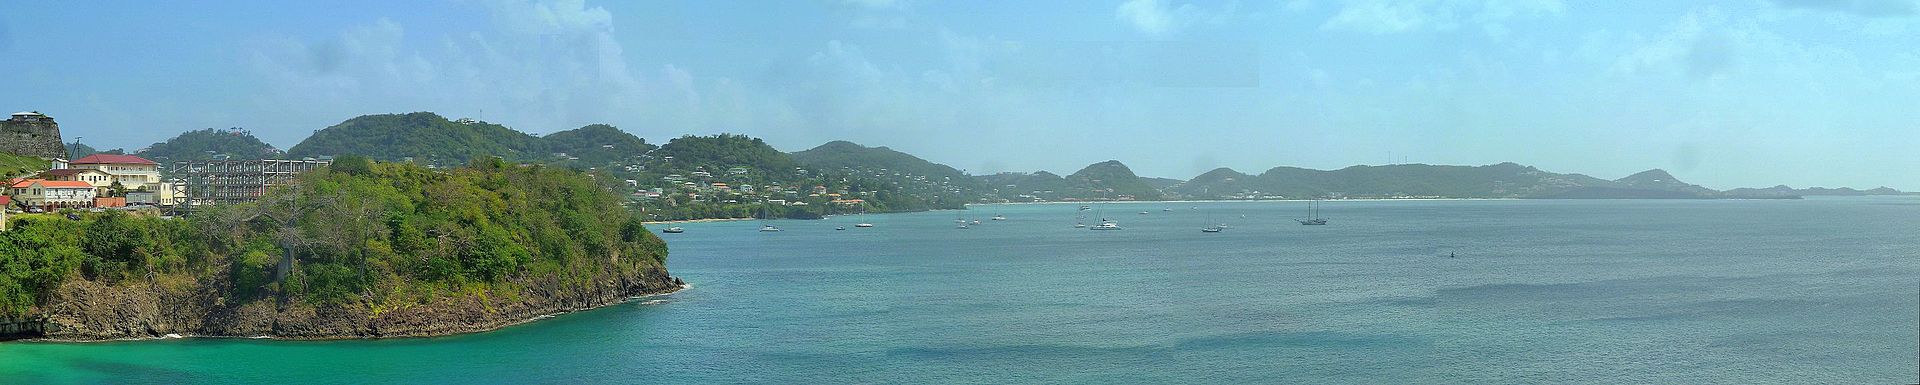 Grenada, Von giggel, CC BY 3.0, https://commons.wikimedia.org/w/index.php?curid=54576670